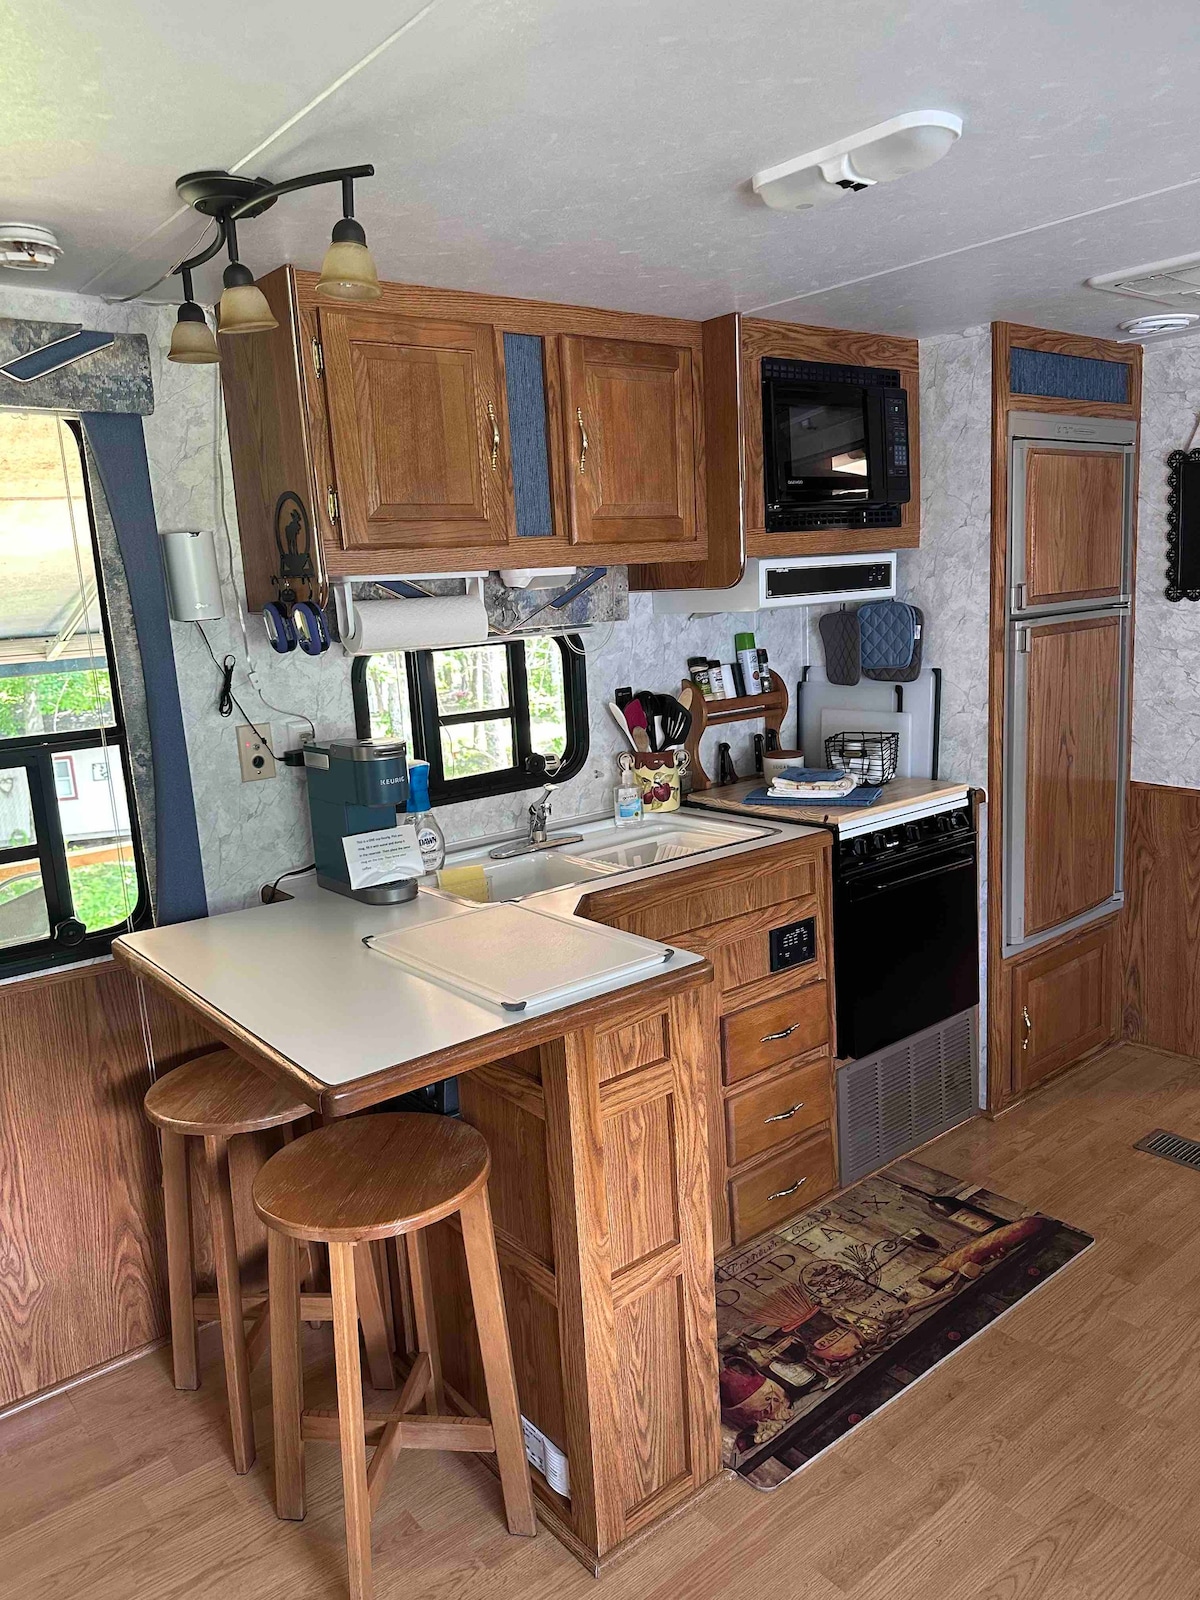 Beautiful 38’ 2 bedroom camper on the river!